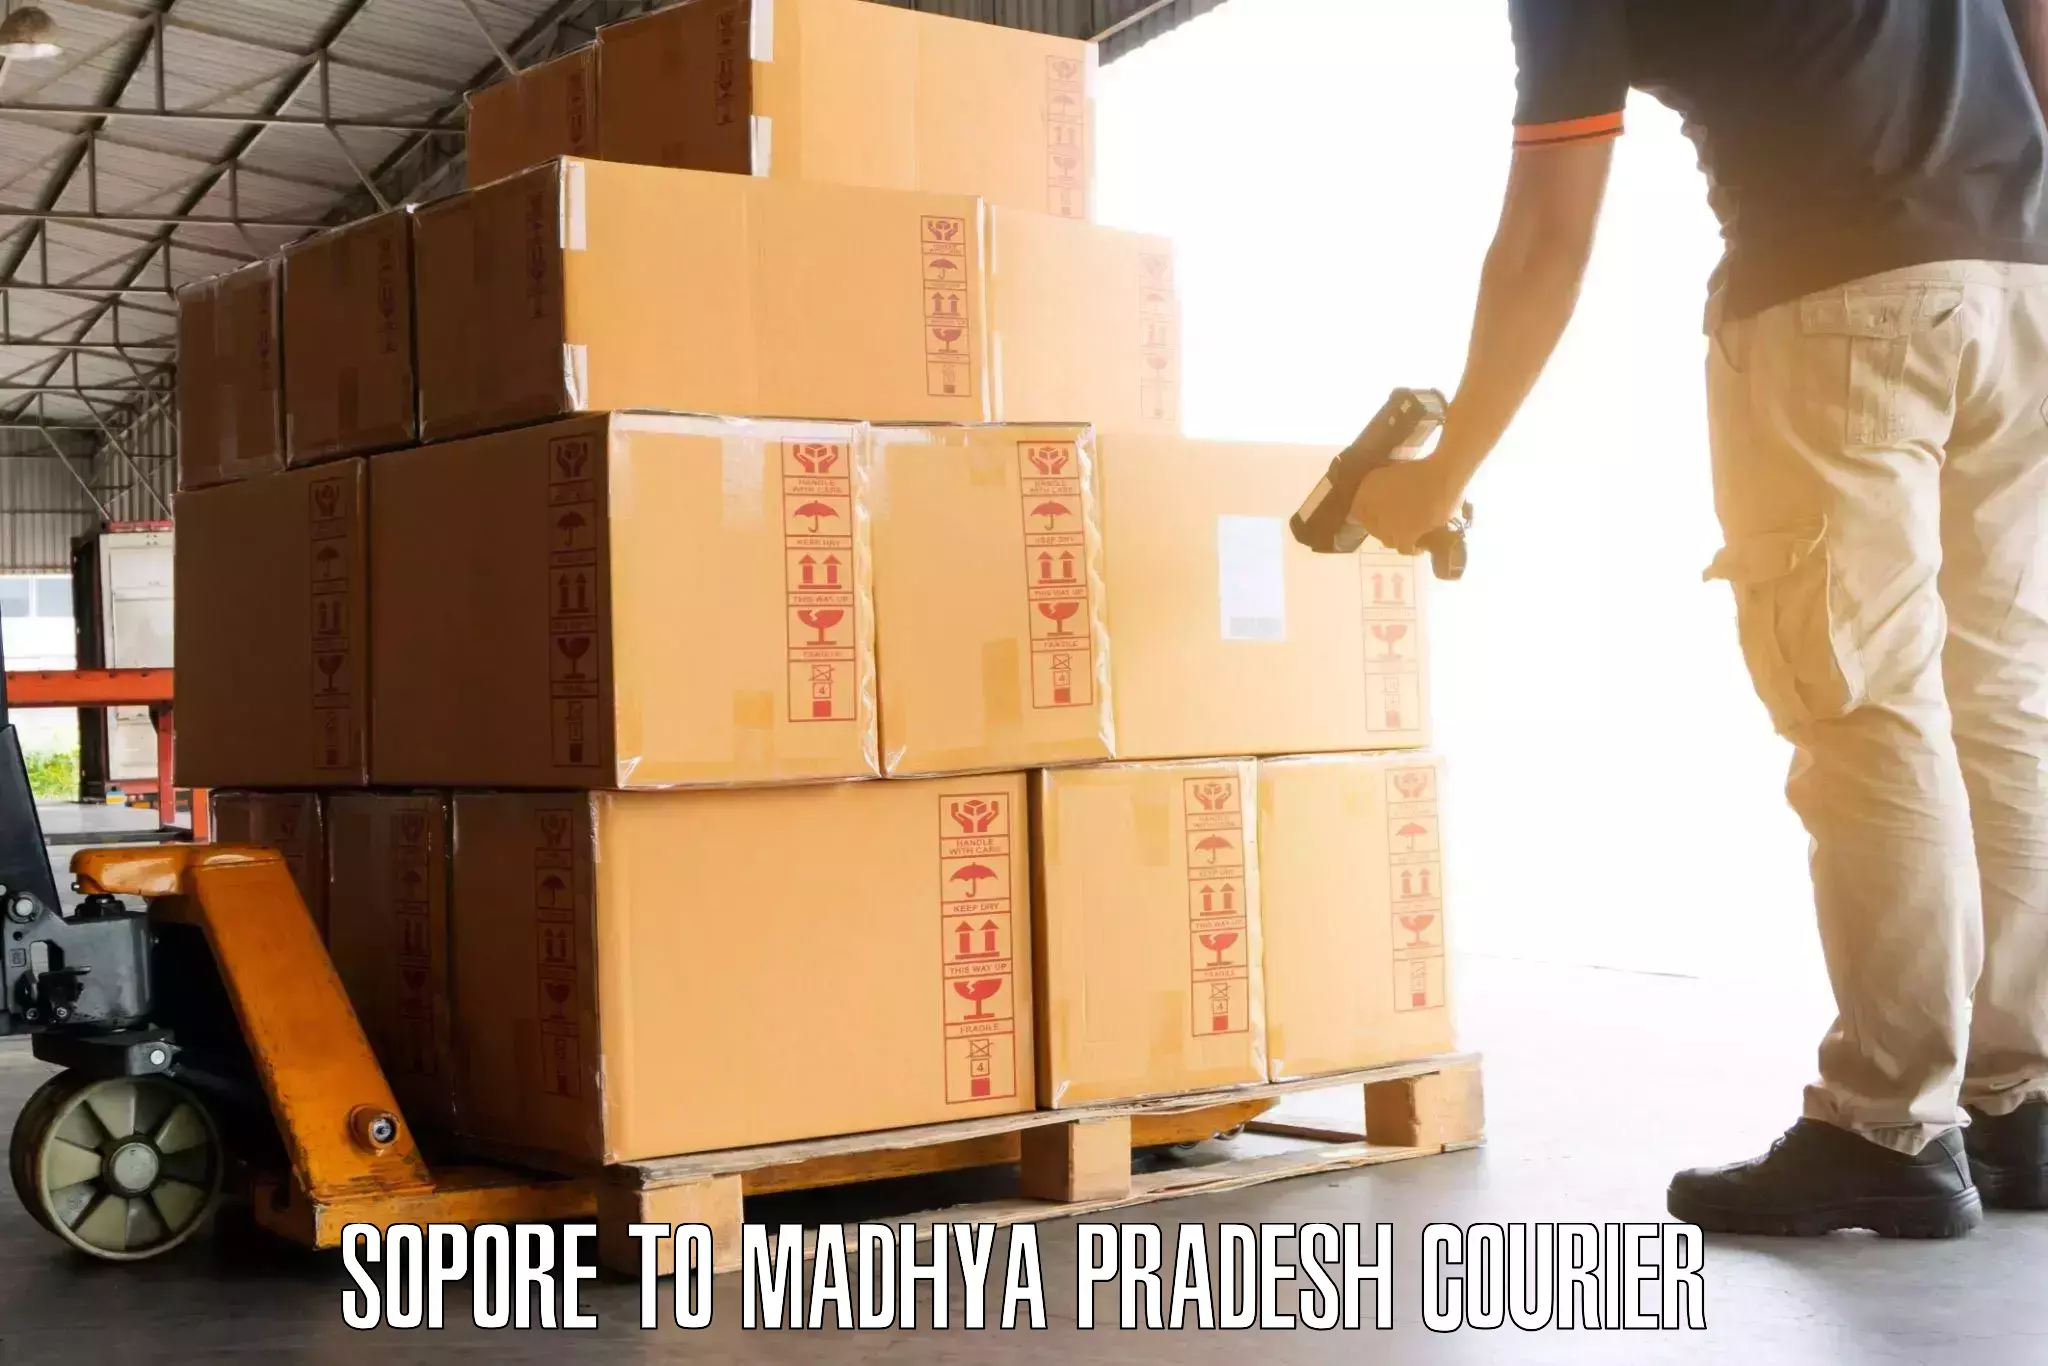 Luggage shipment specialists Sopore to Ratlam